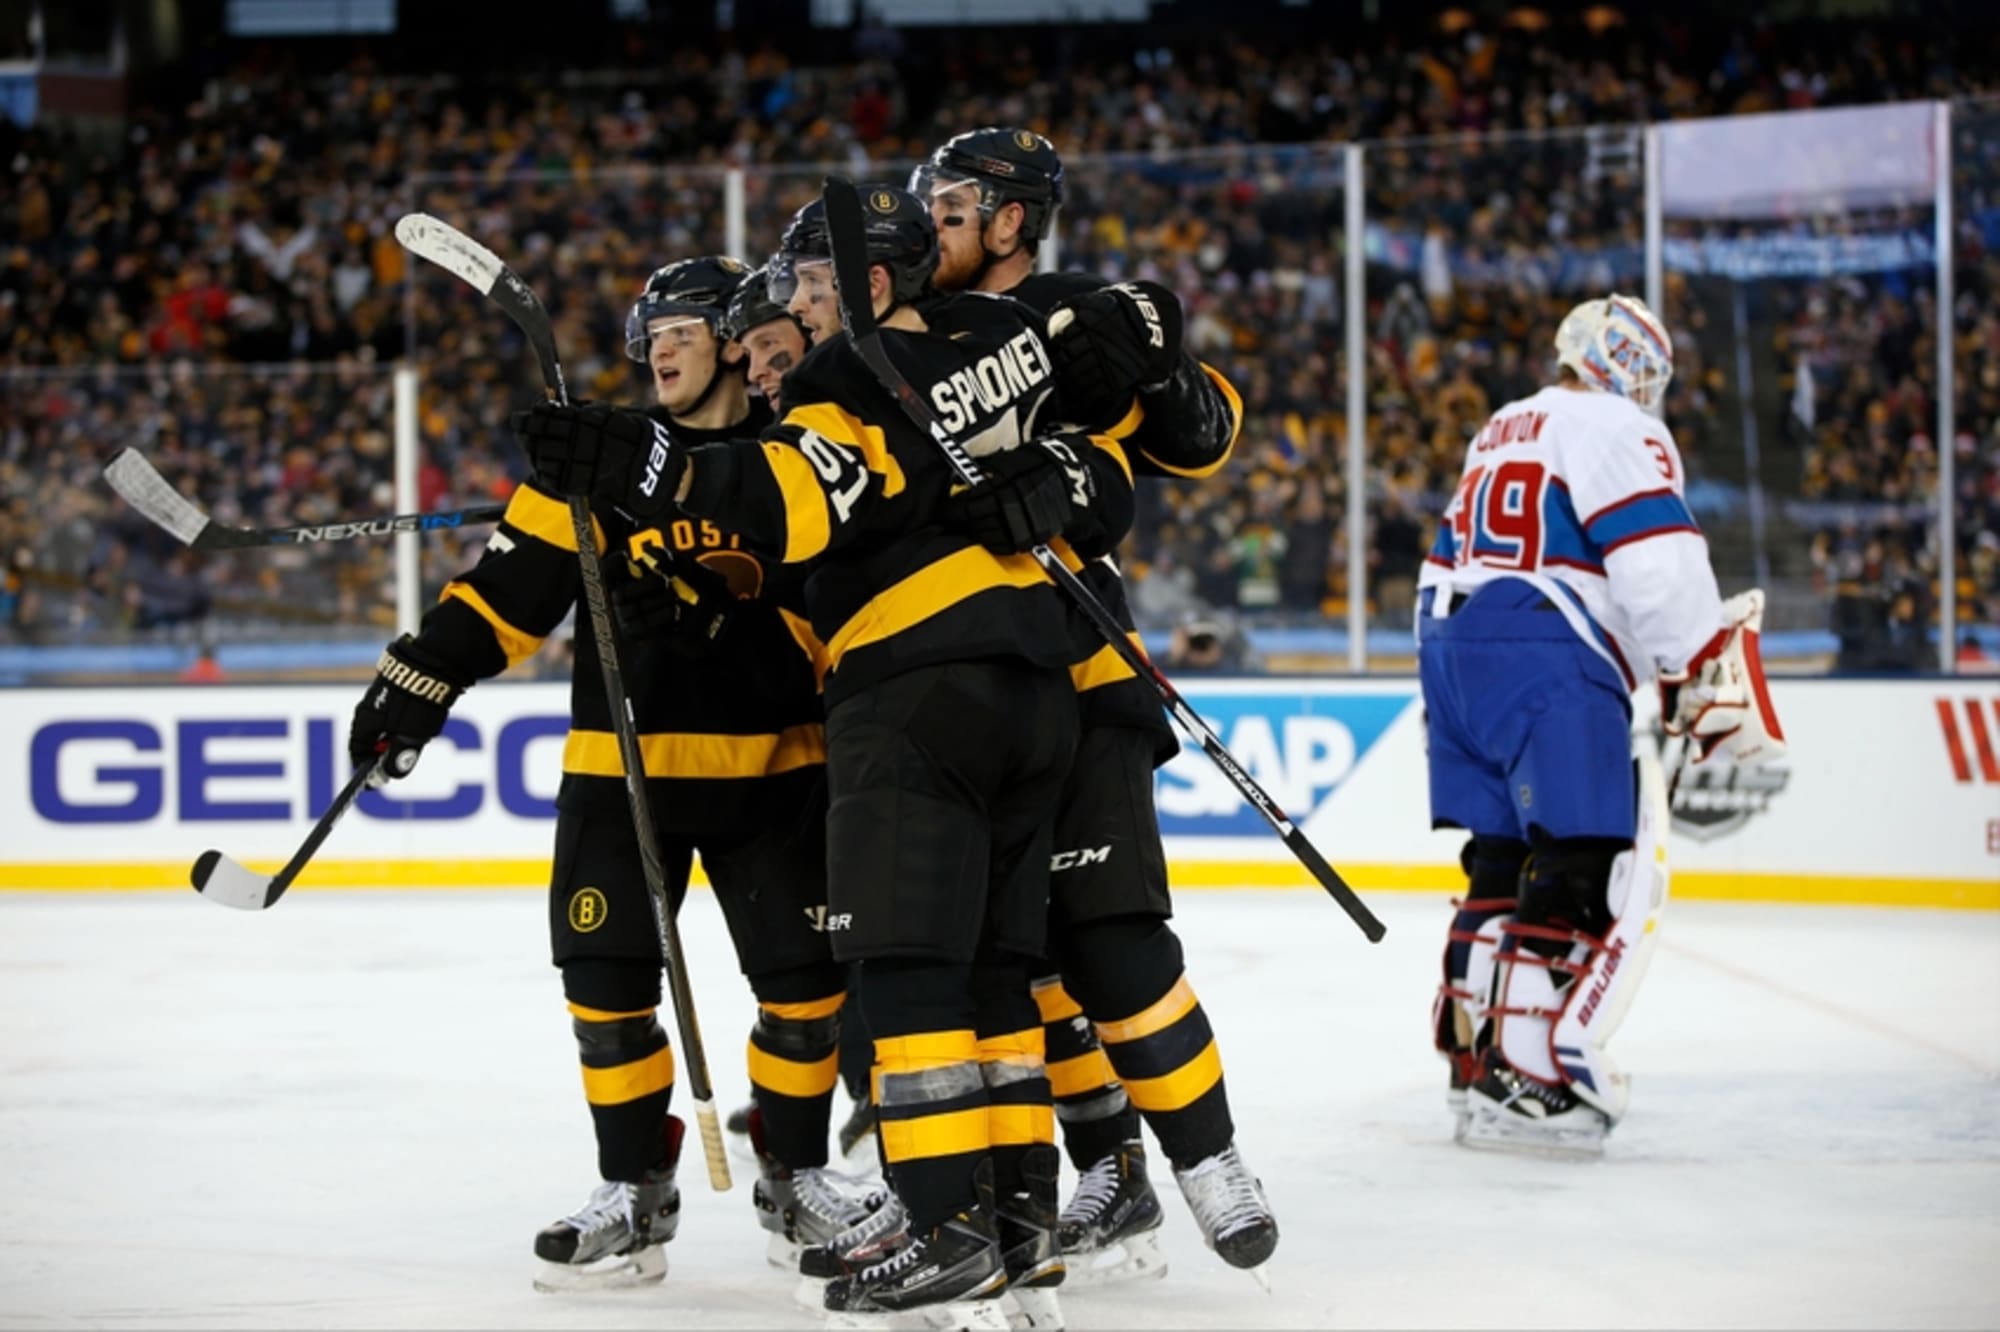 Boston Bruins Winter Classic Loss Brings Roster Moves